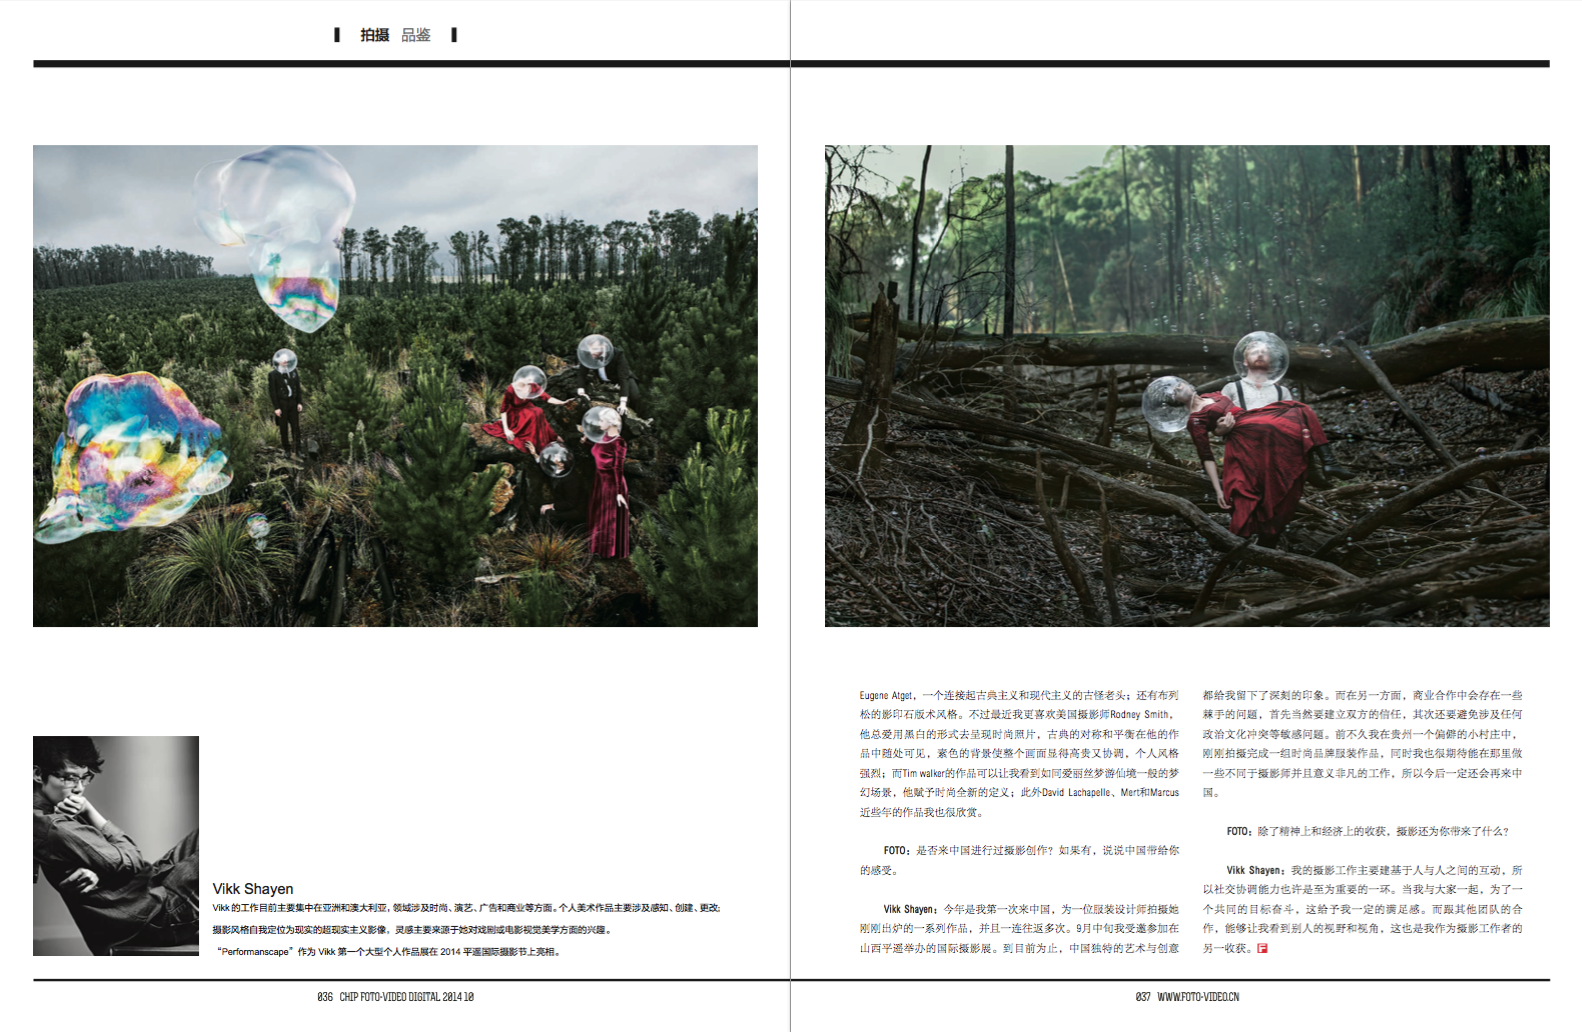 Chipfoto Magazine interview October 2014_06.png